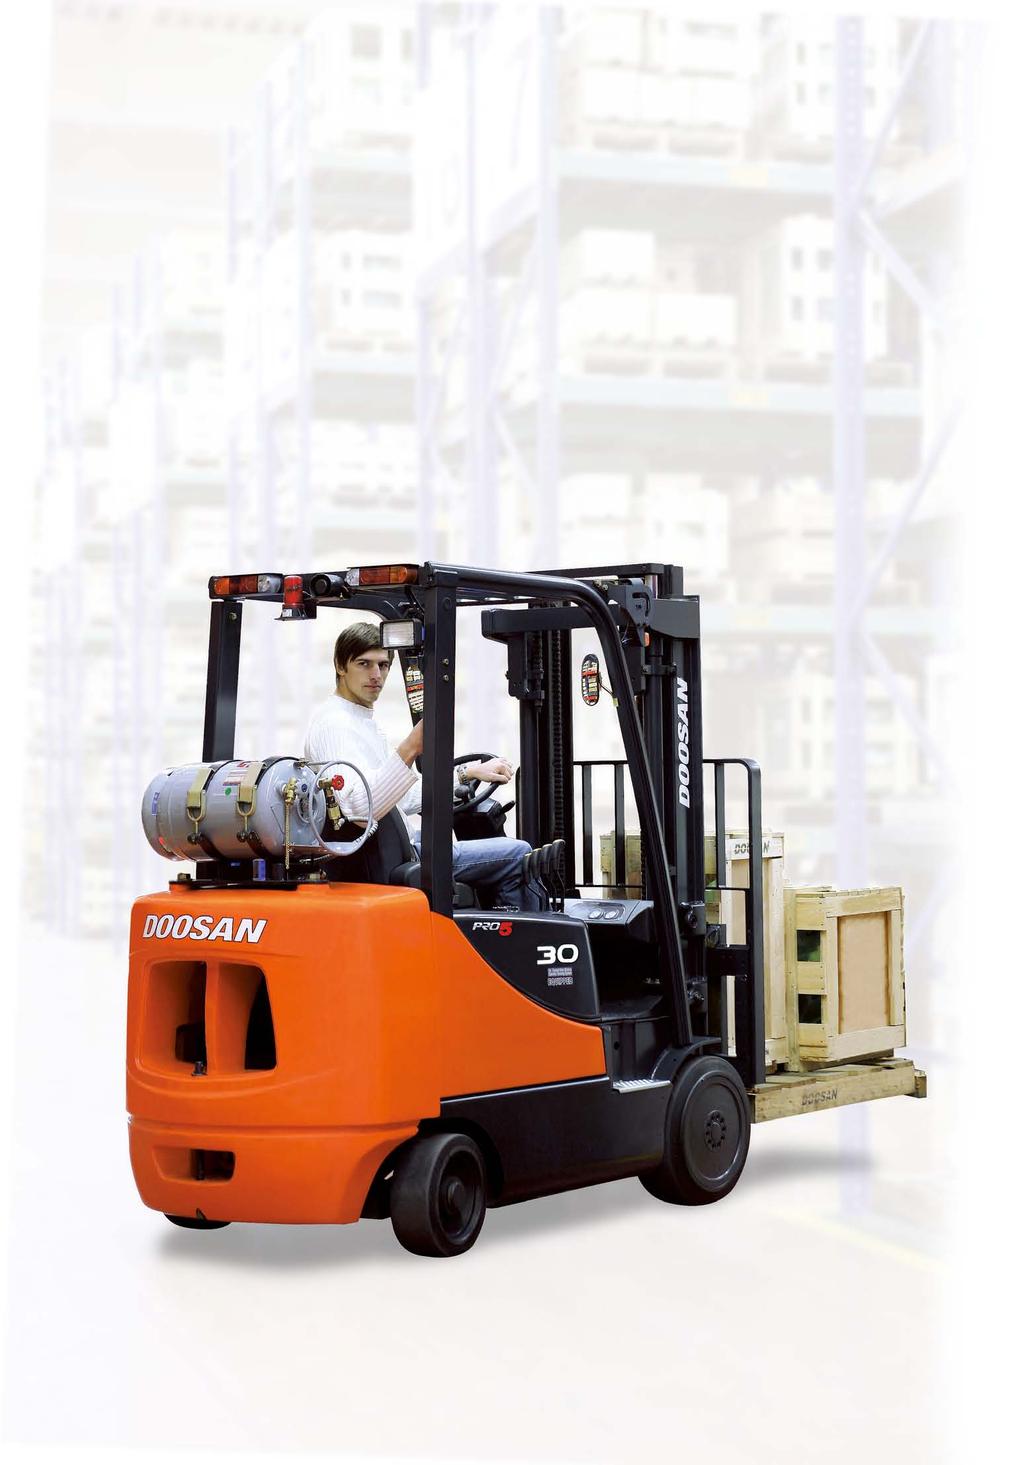 Proven Quality, Responsive Service and A Reliable Partner... After sales servicing of Doosan forklifts is available from the selling dealership backed by Doosan s own customer service center.